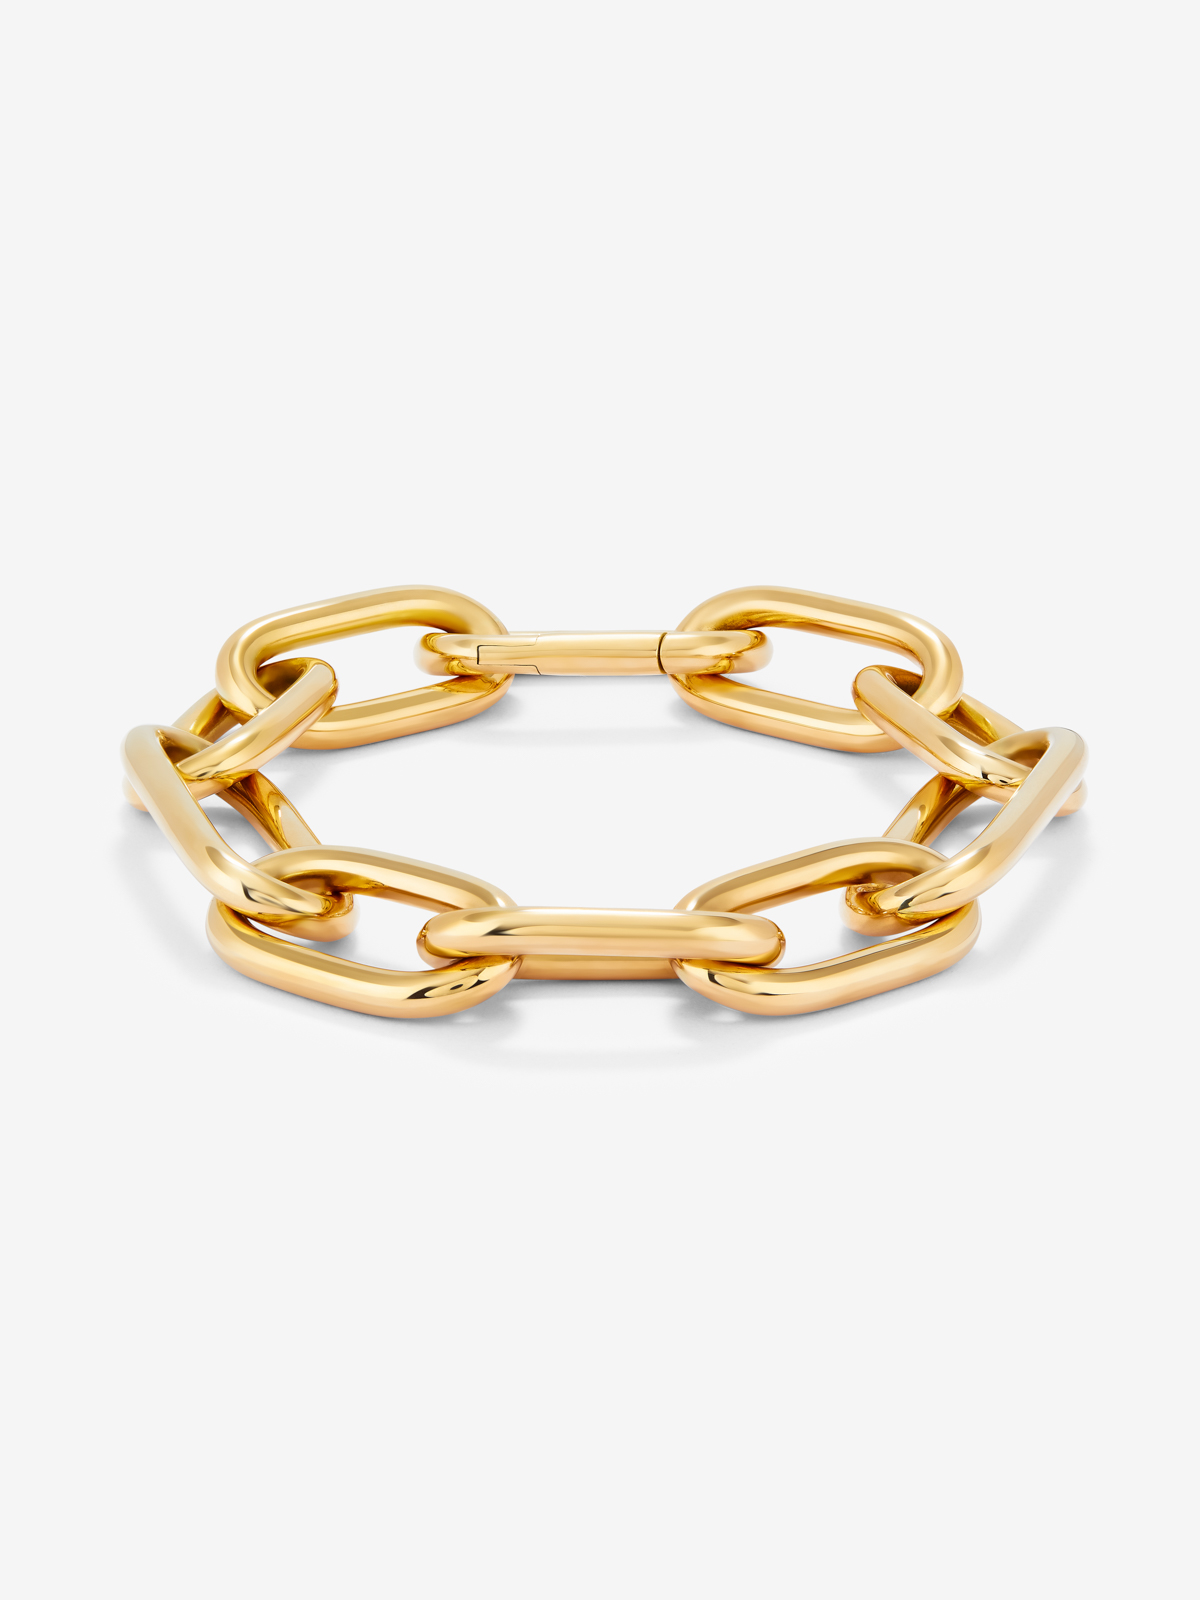 Extra large link bracelet in 18K yellow gold